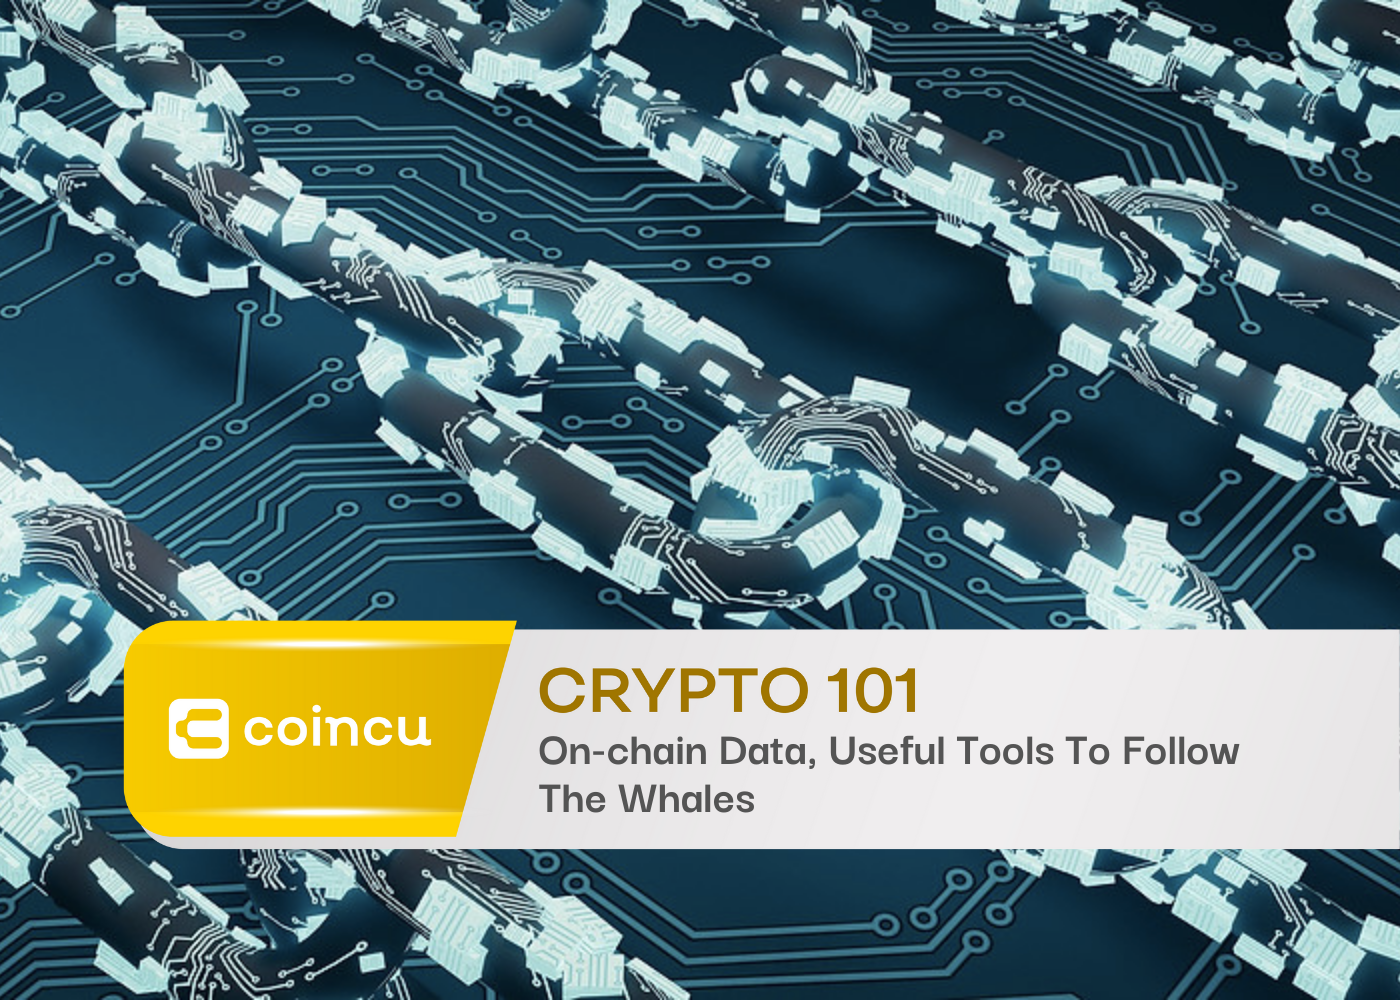 Crypto 101: On-chain Data, Useful Tools To Follow The Whales